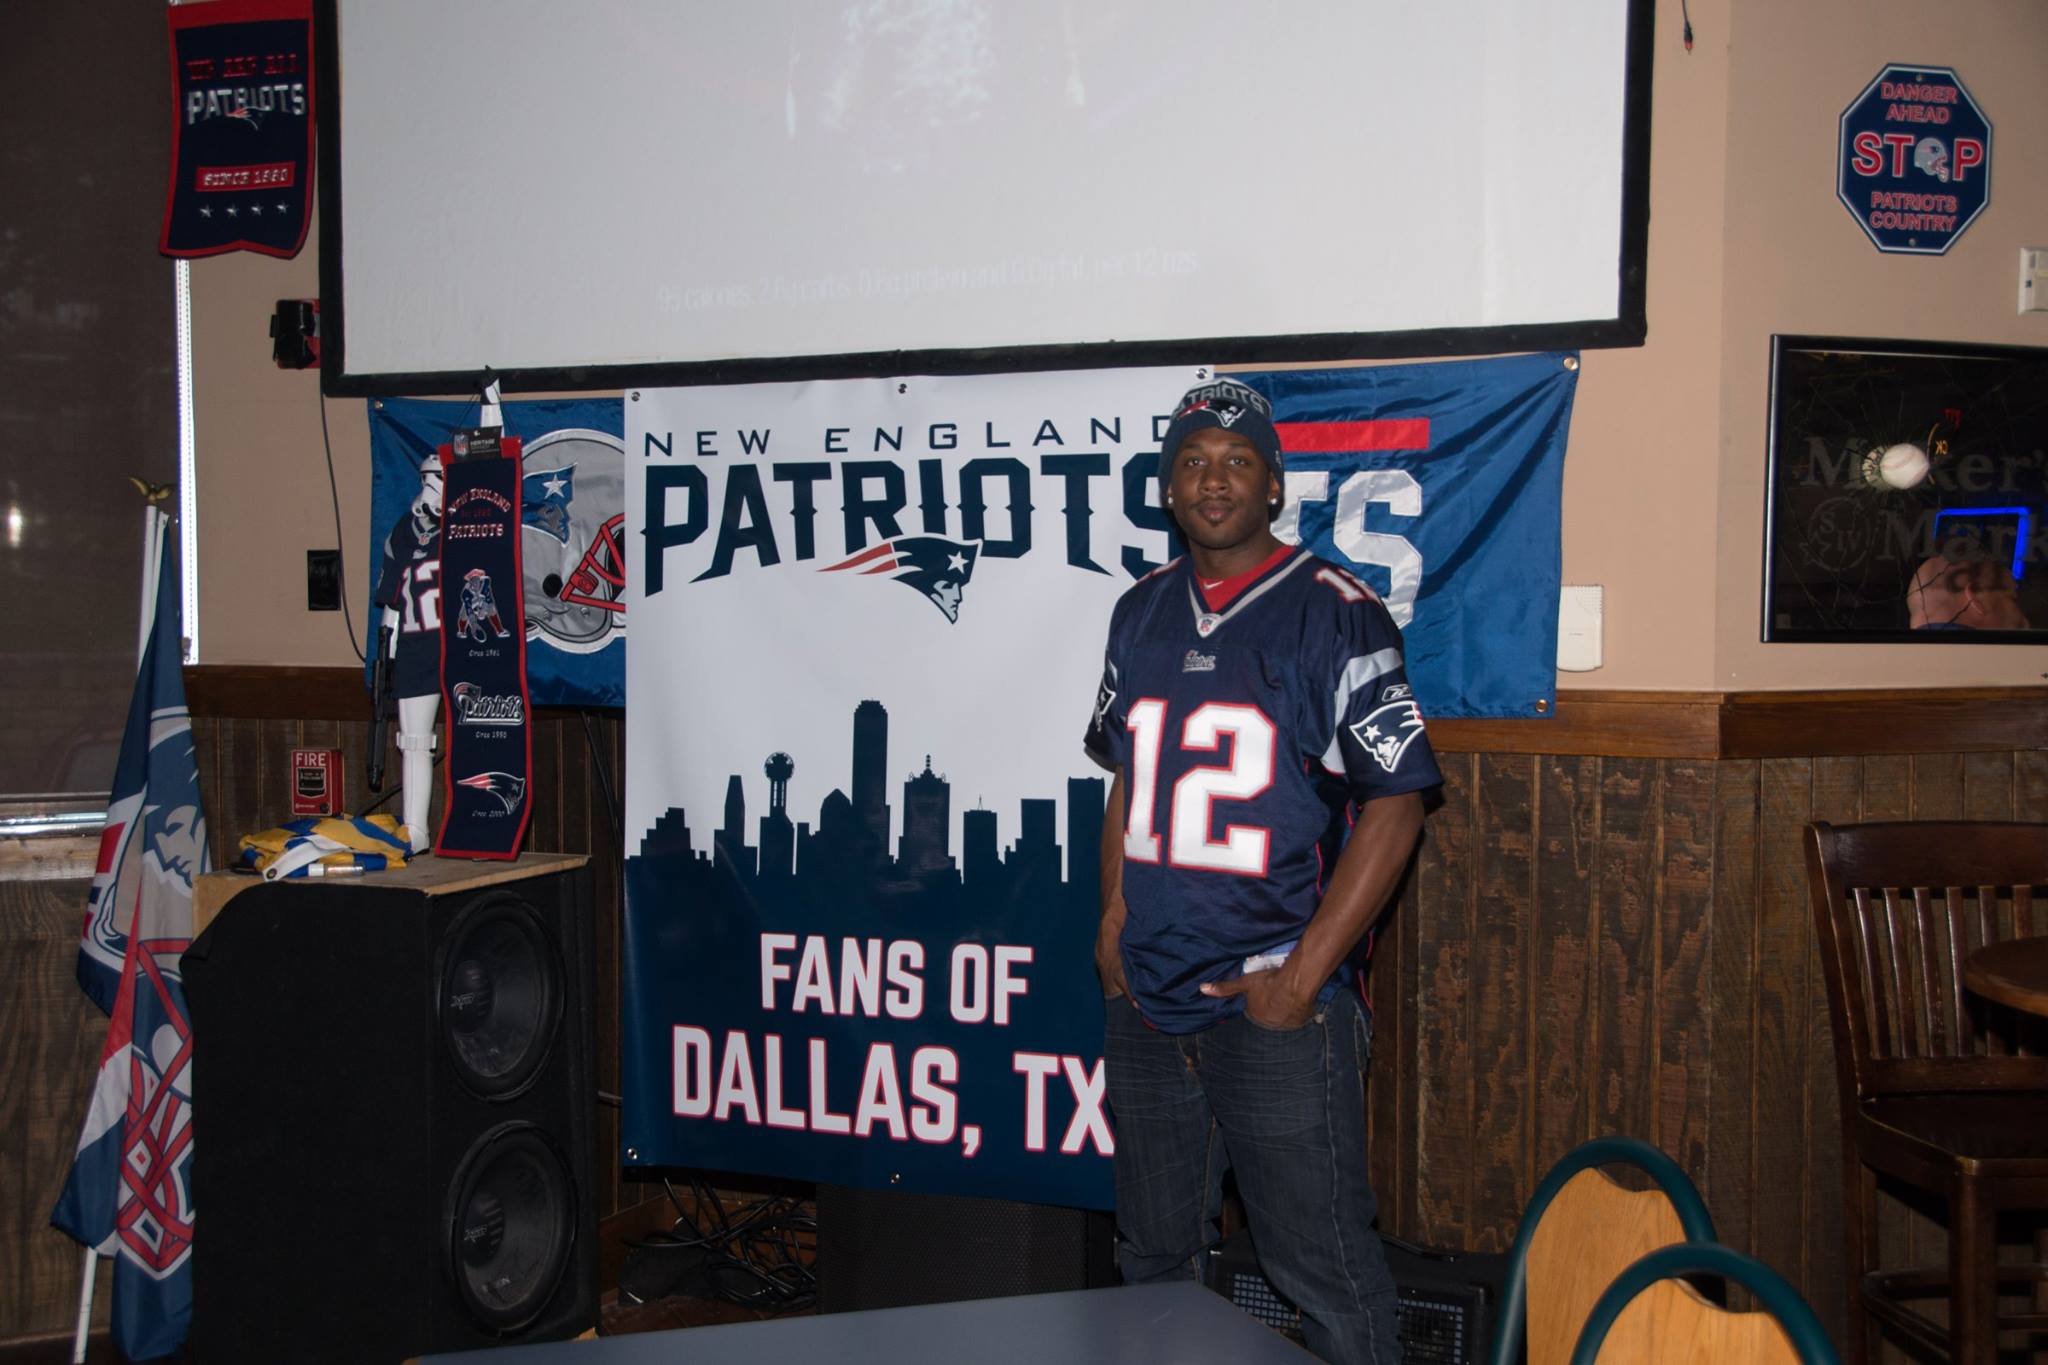 Search for Patriots Official Fan Clubs and Bars